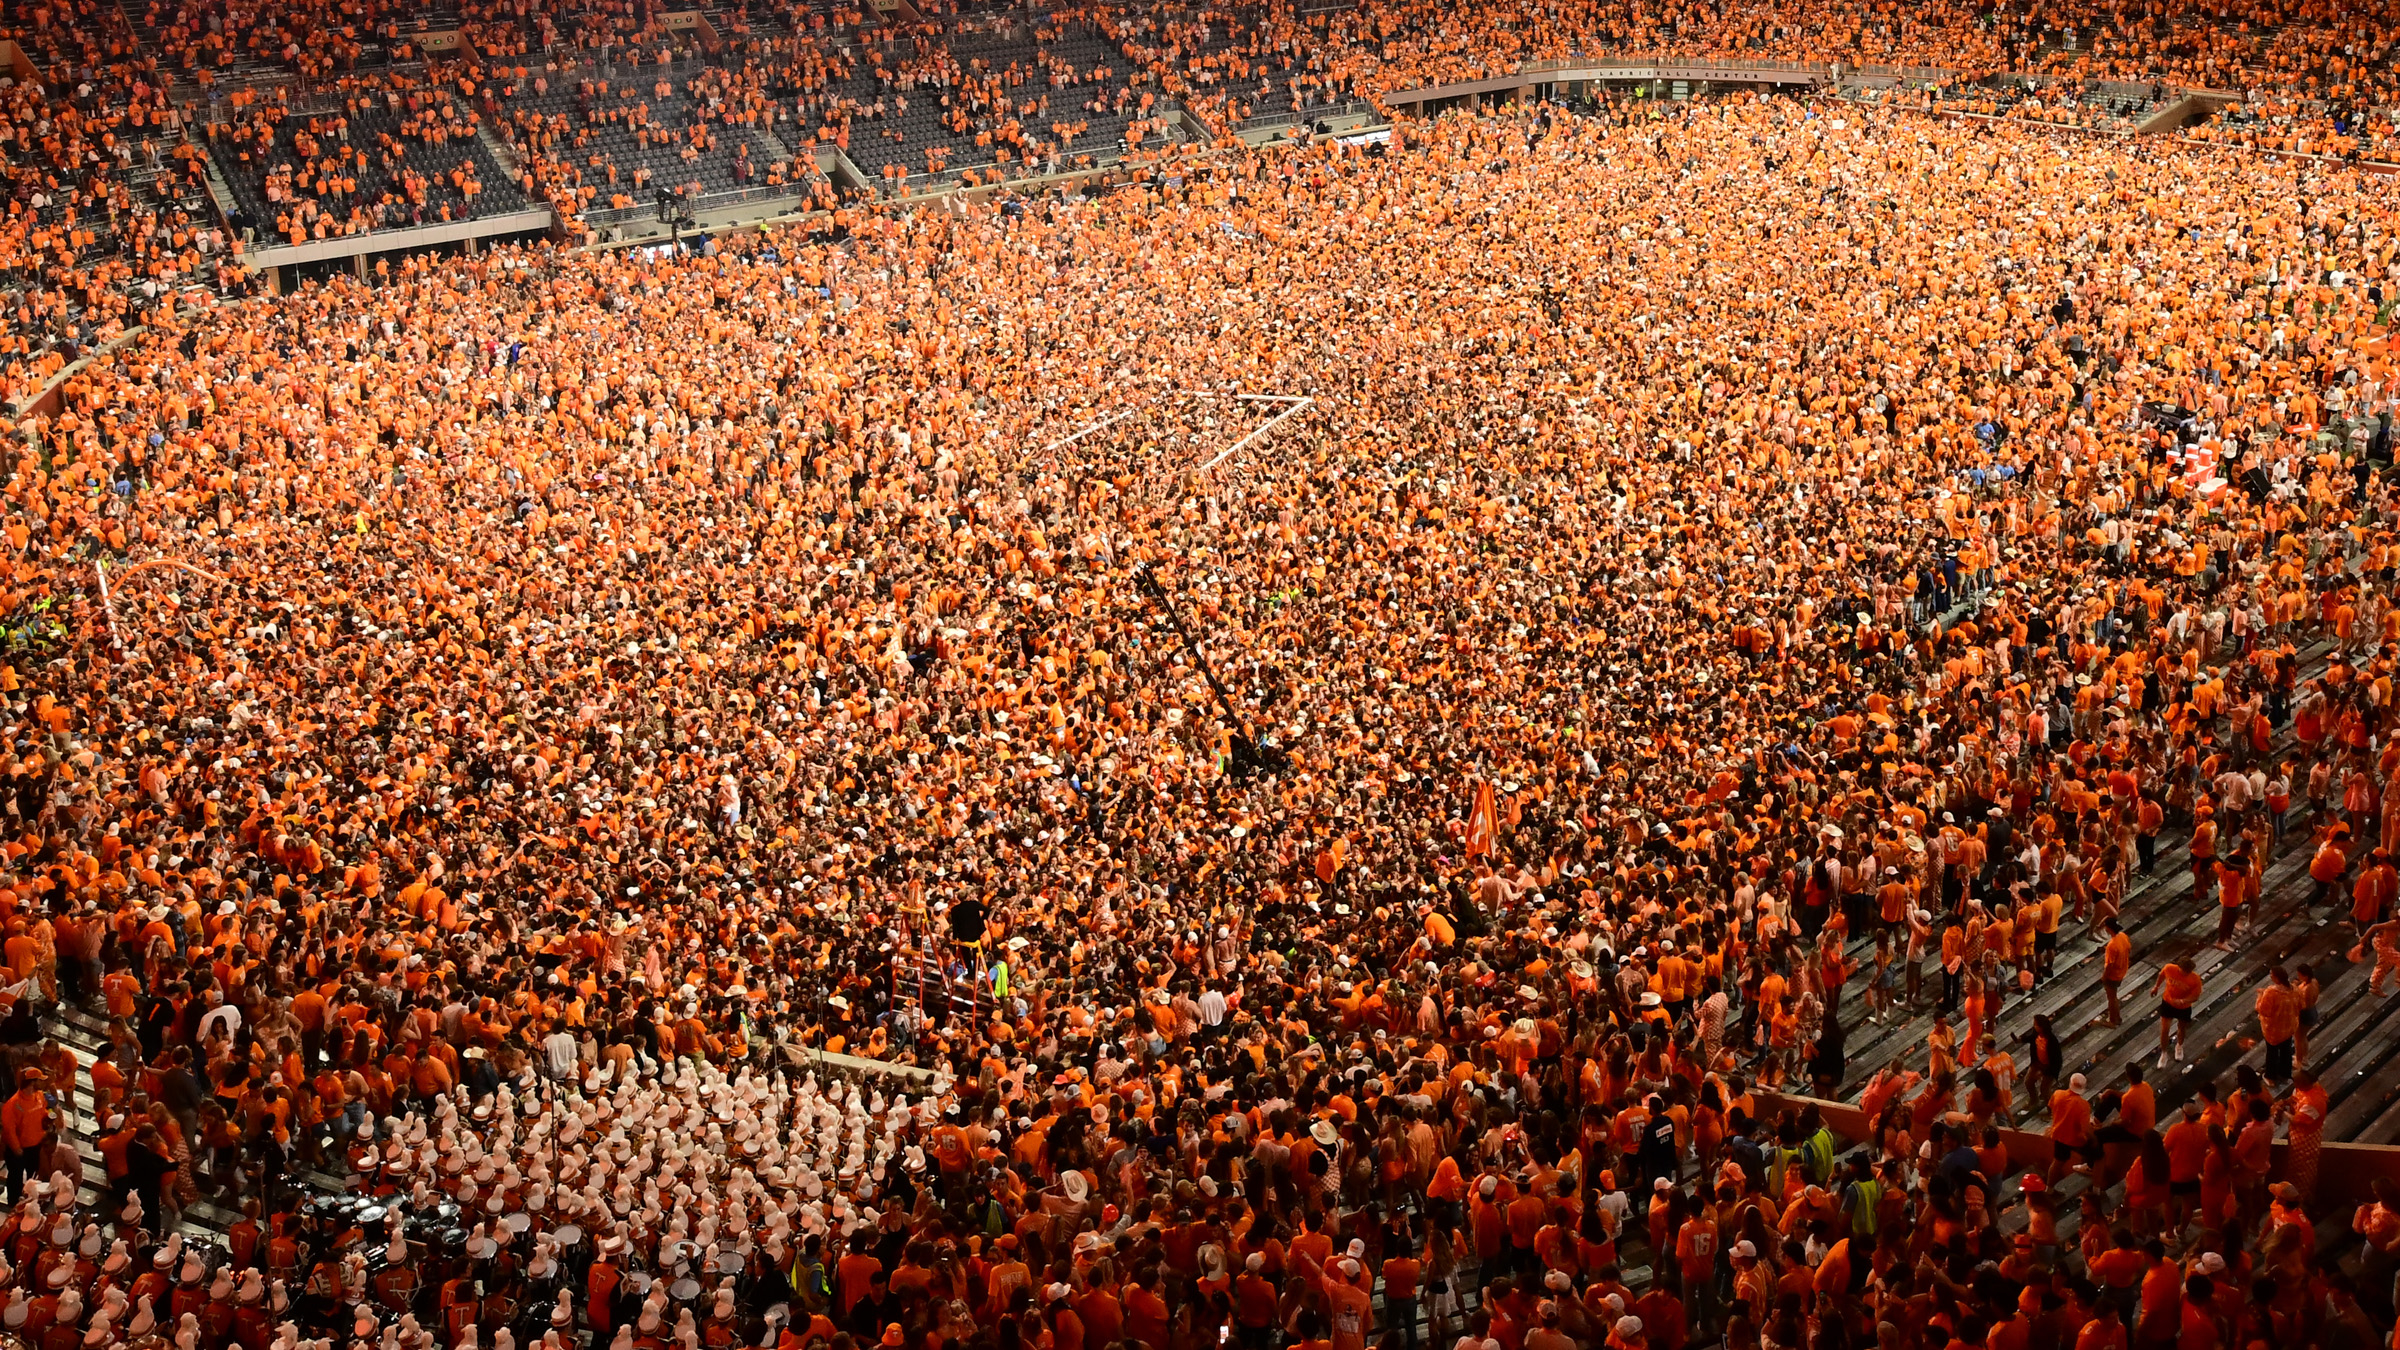 Knoxville, TN - October 15, 2022 - Neyland Stadium: Fans of the Tennessee Volunteers (Vols) storm the field and tear down the goal posts following a regular season game.
(Photo by Phil Ellsworth / ESPN Images)